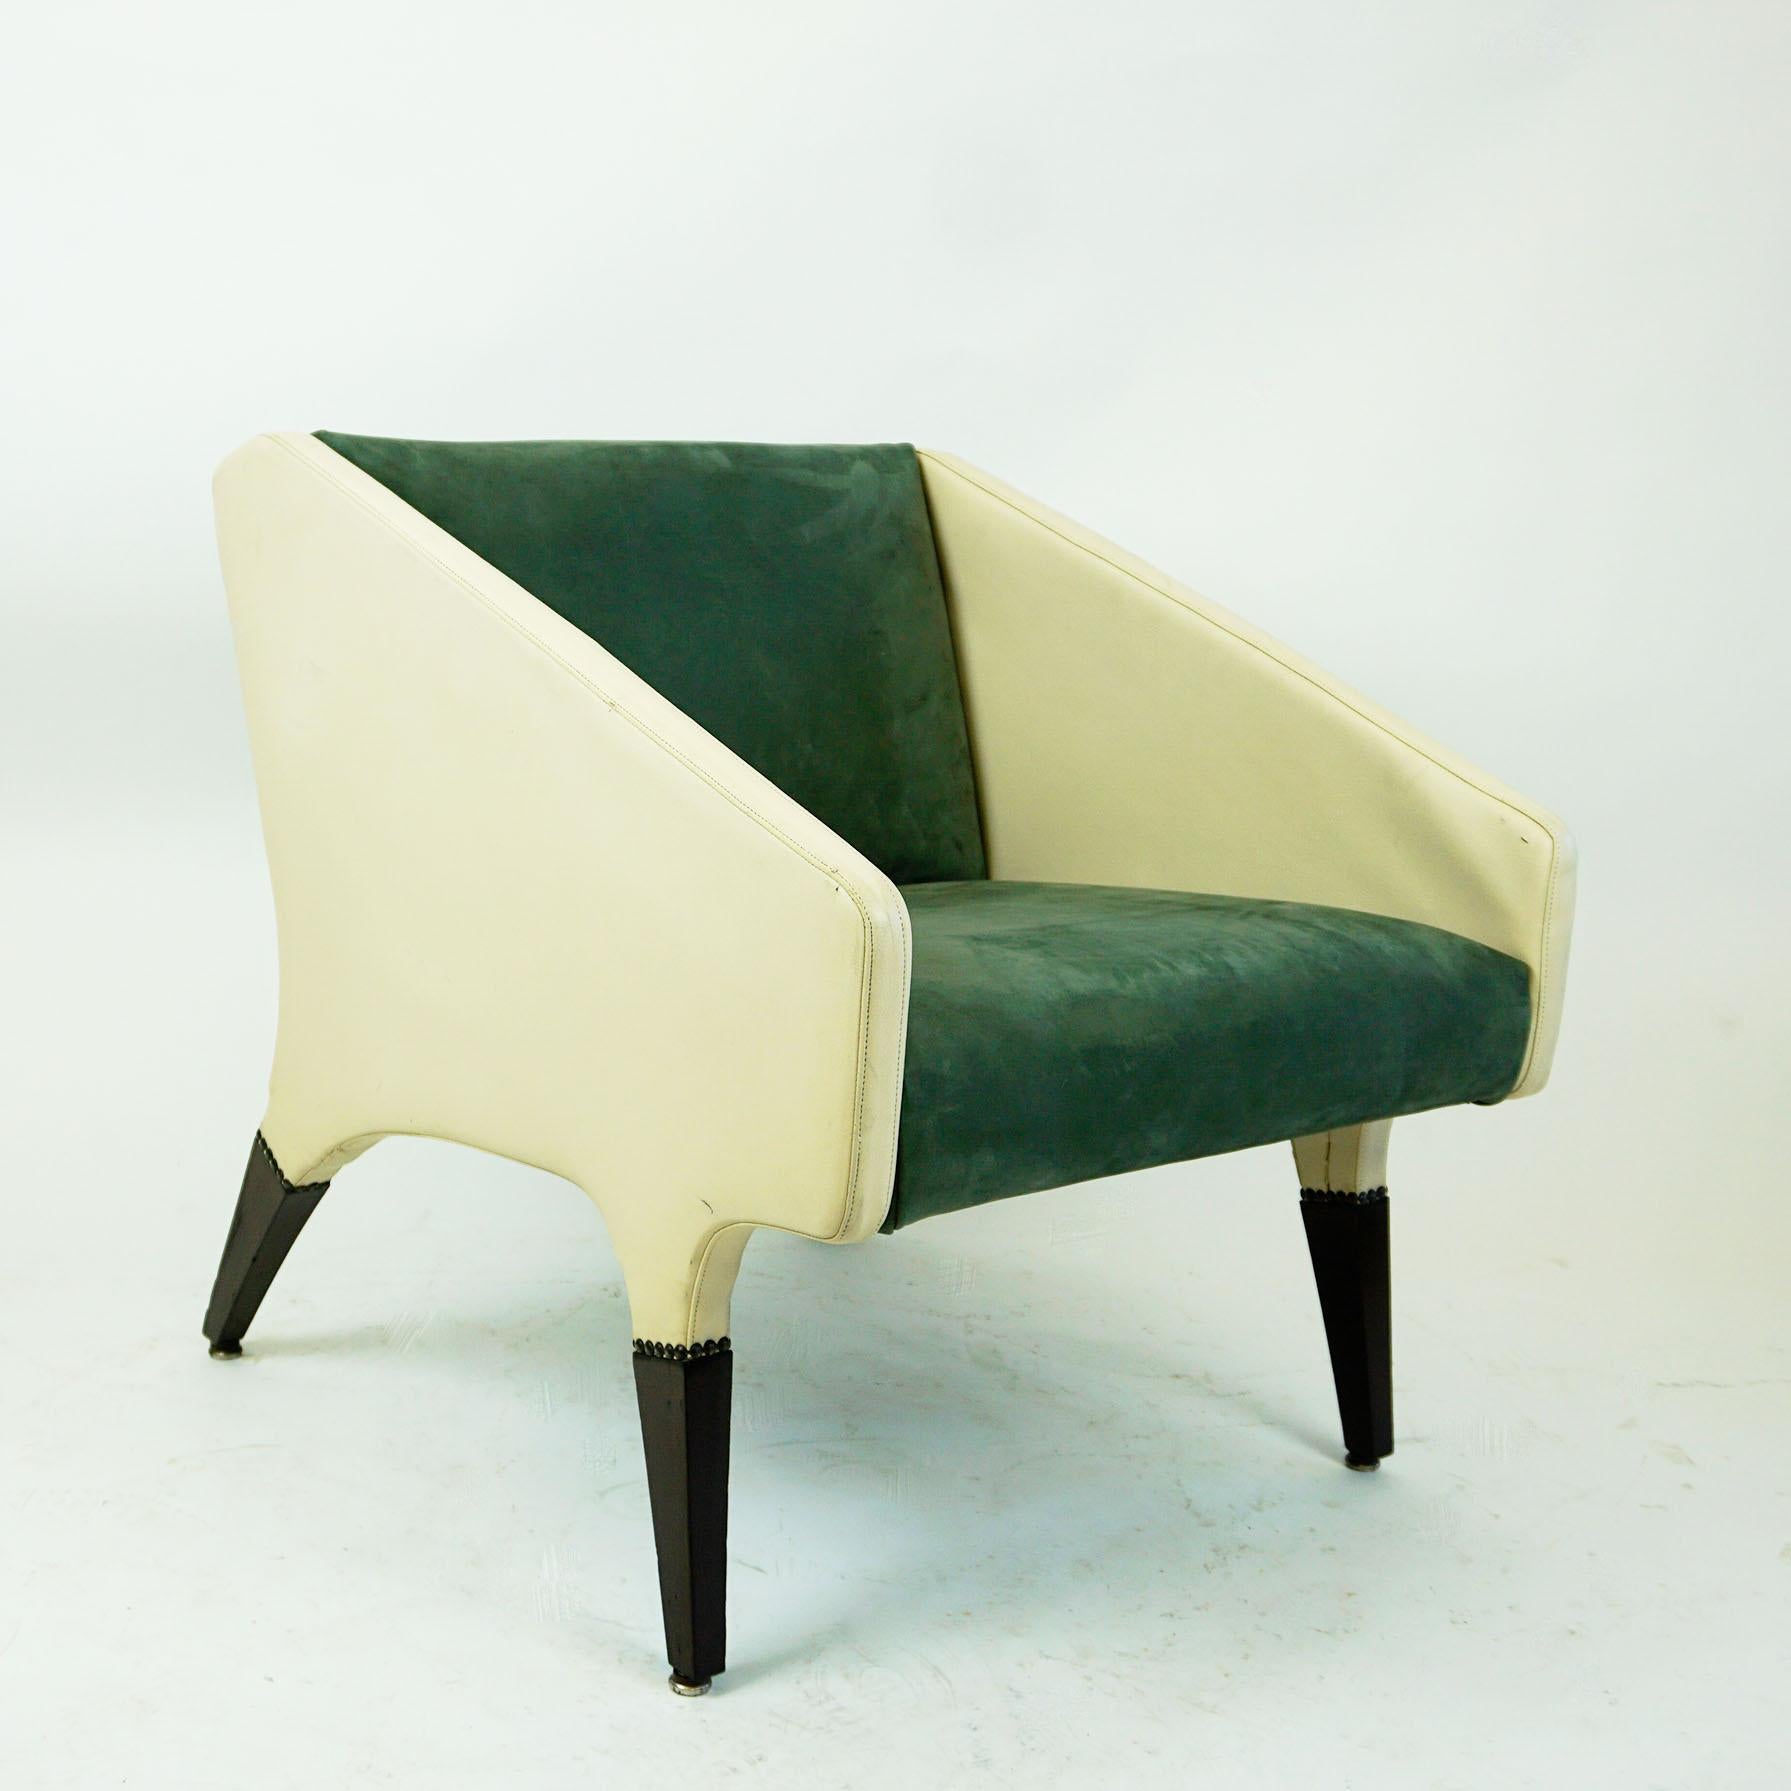 Lacquered Italian Midcentury Parco dei Principi Lounge Chair by Gio Ponti for Cassina